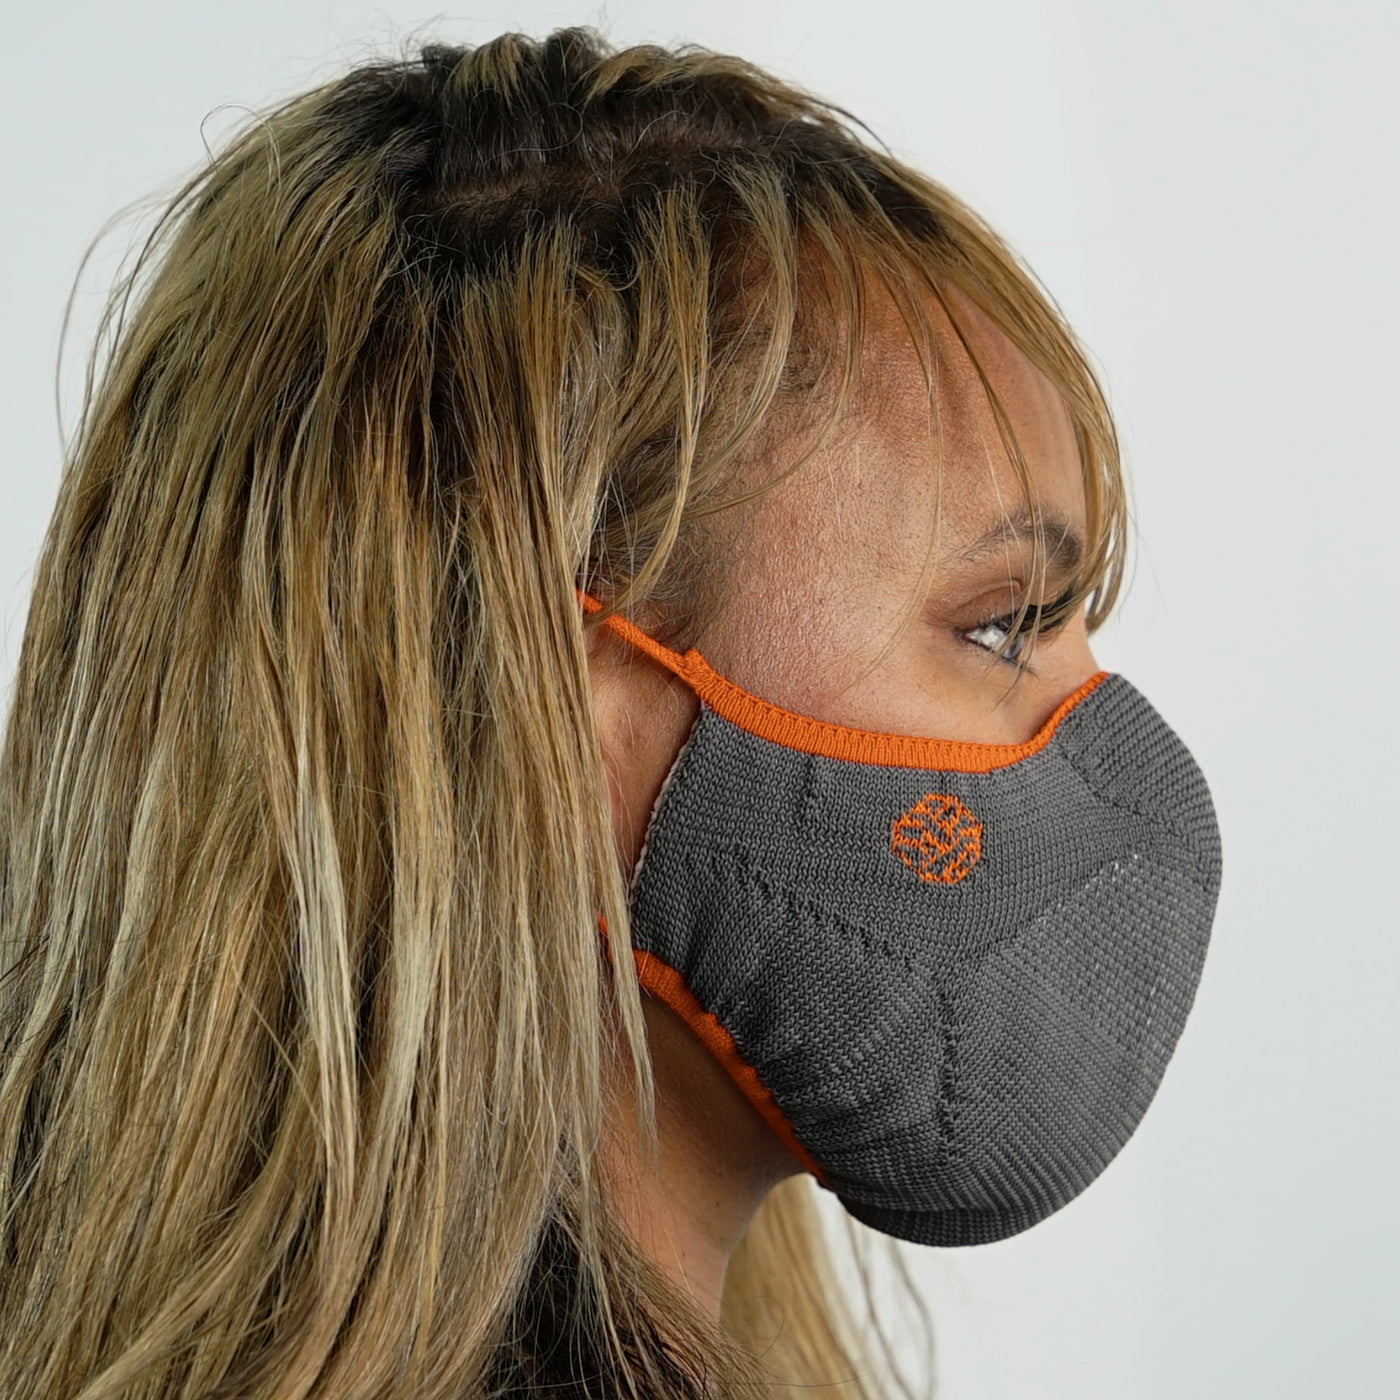 Limited Edition Face Mask - Martian Icon